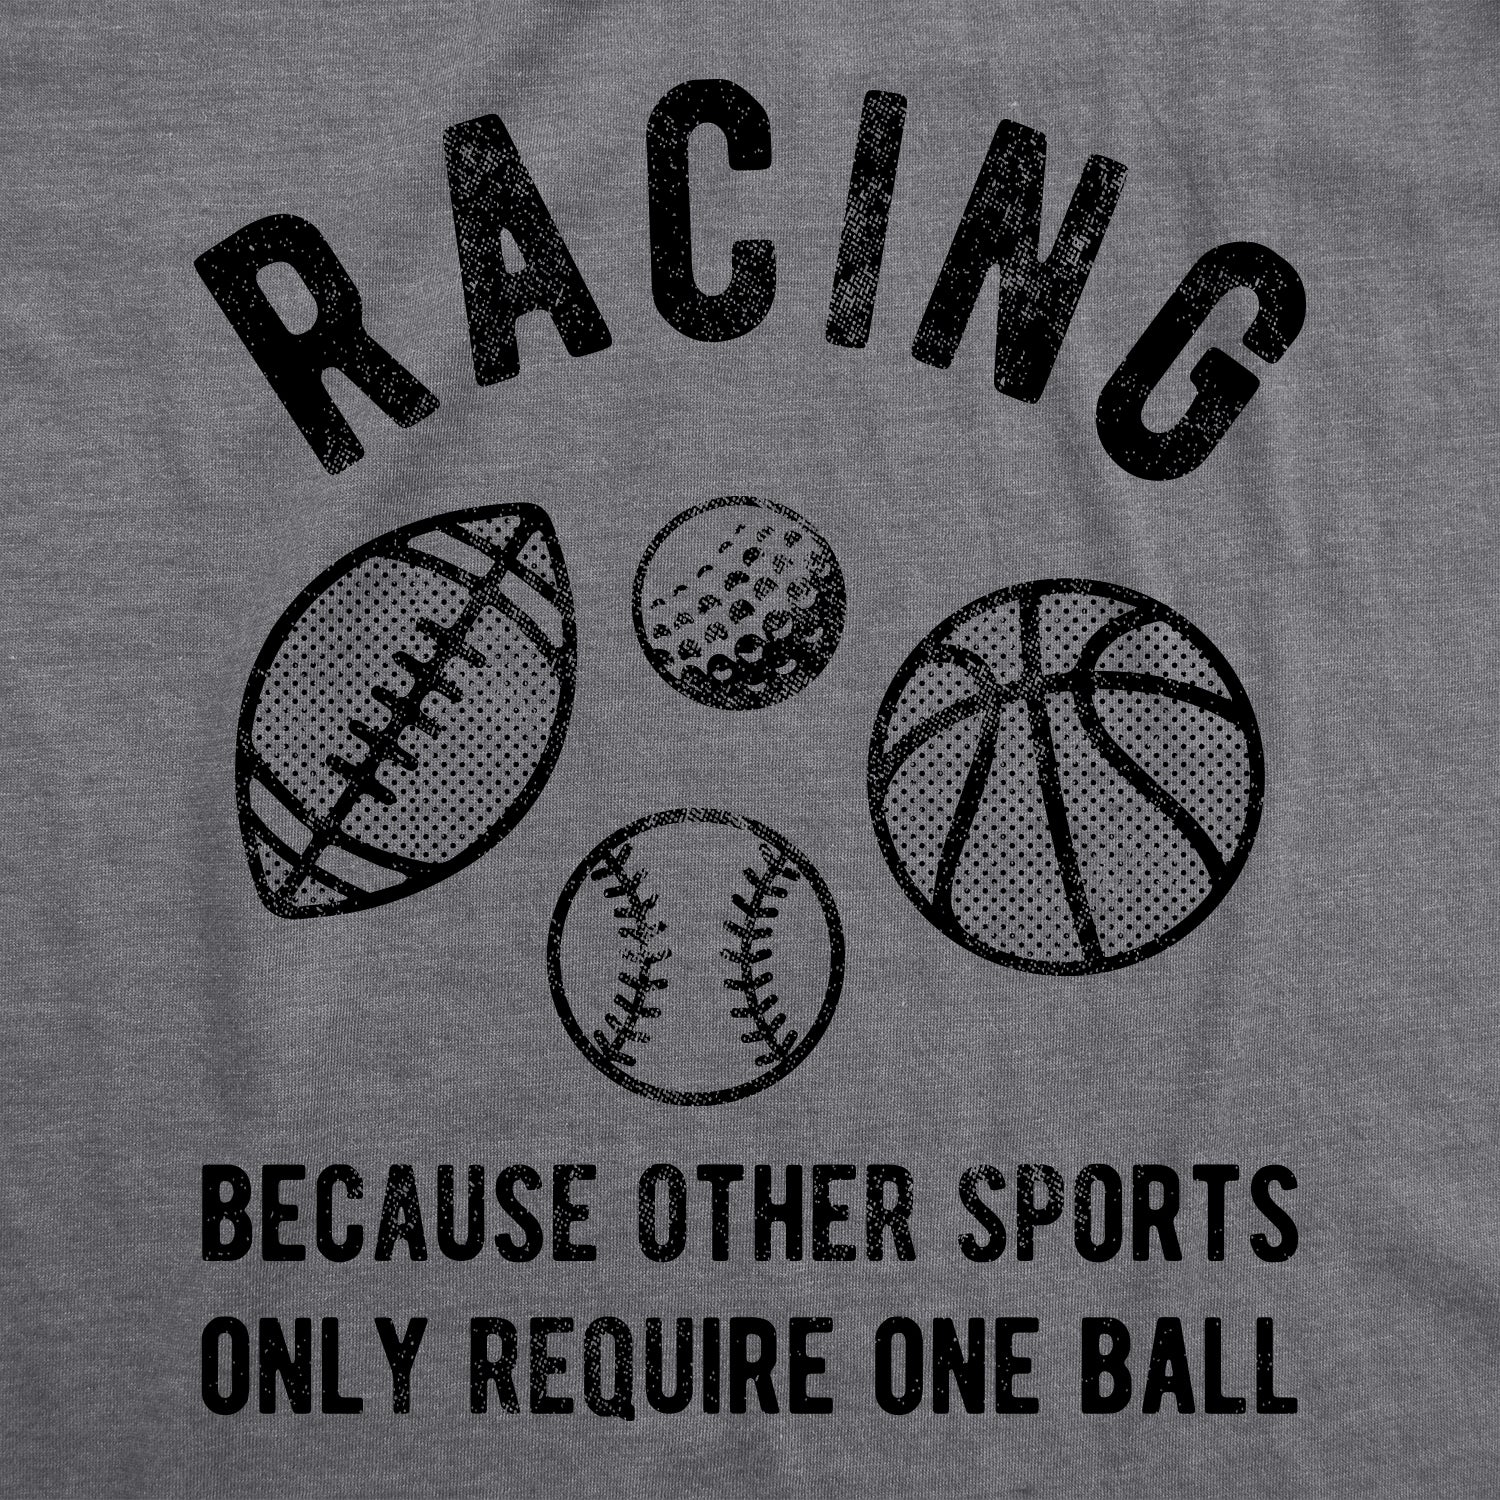 Funny Dark Heather Grey Racing Because Other Sports Require Only One Ball Mens T Shirt Nerdy Mechanic Sarcastic Tee